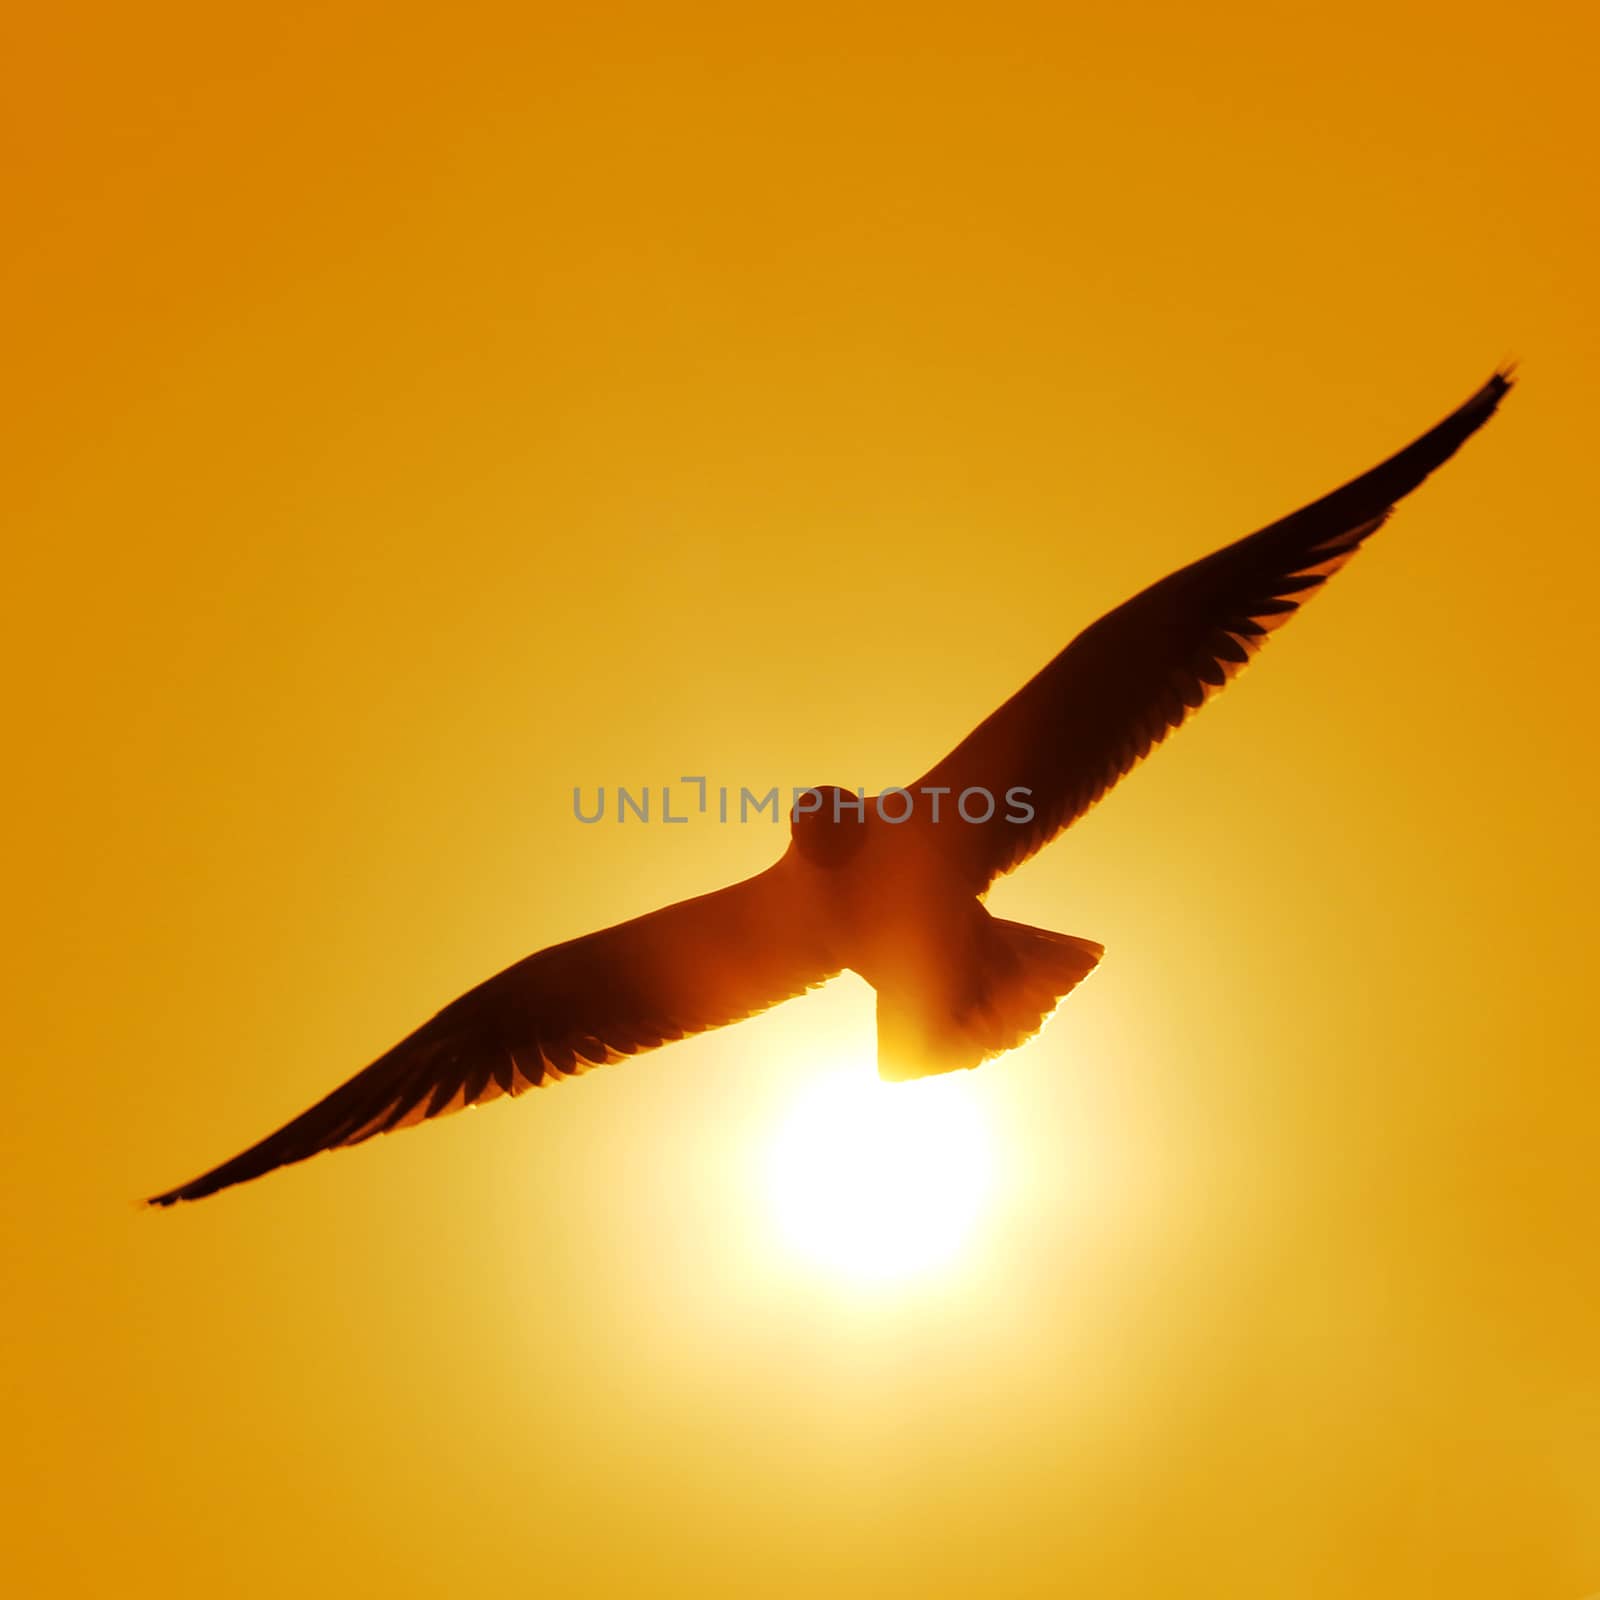 The silhouette of flying seagull by leisuretime70